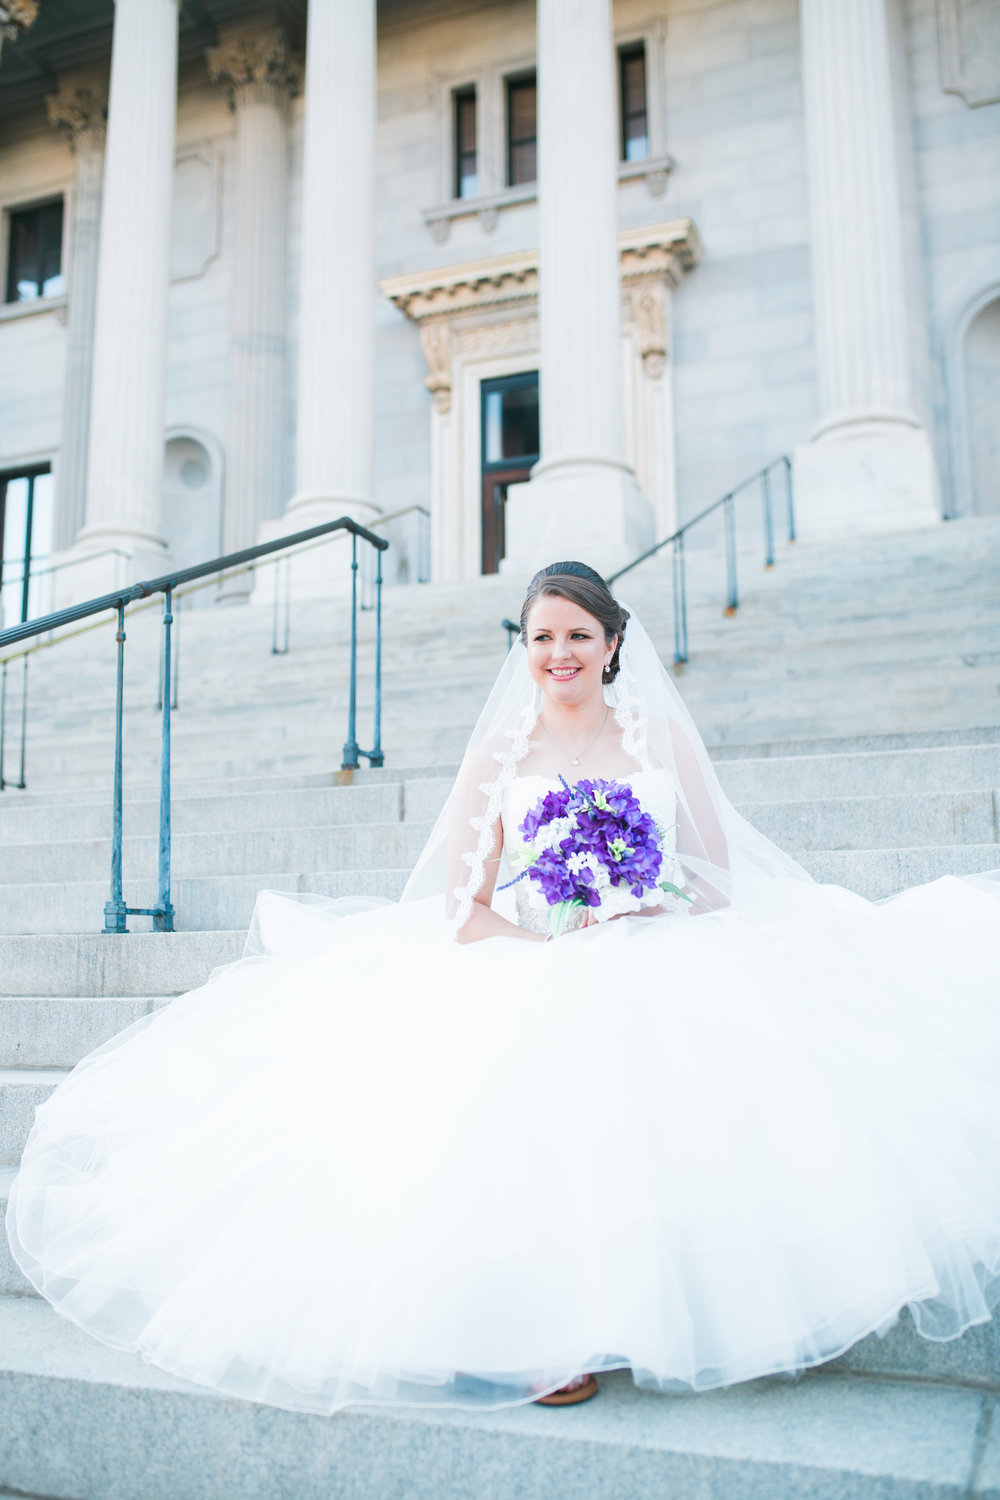 Bride on Statehouse steps holding flowers